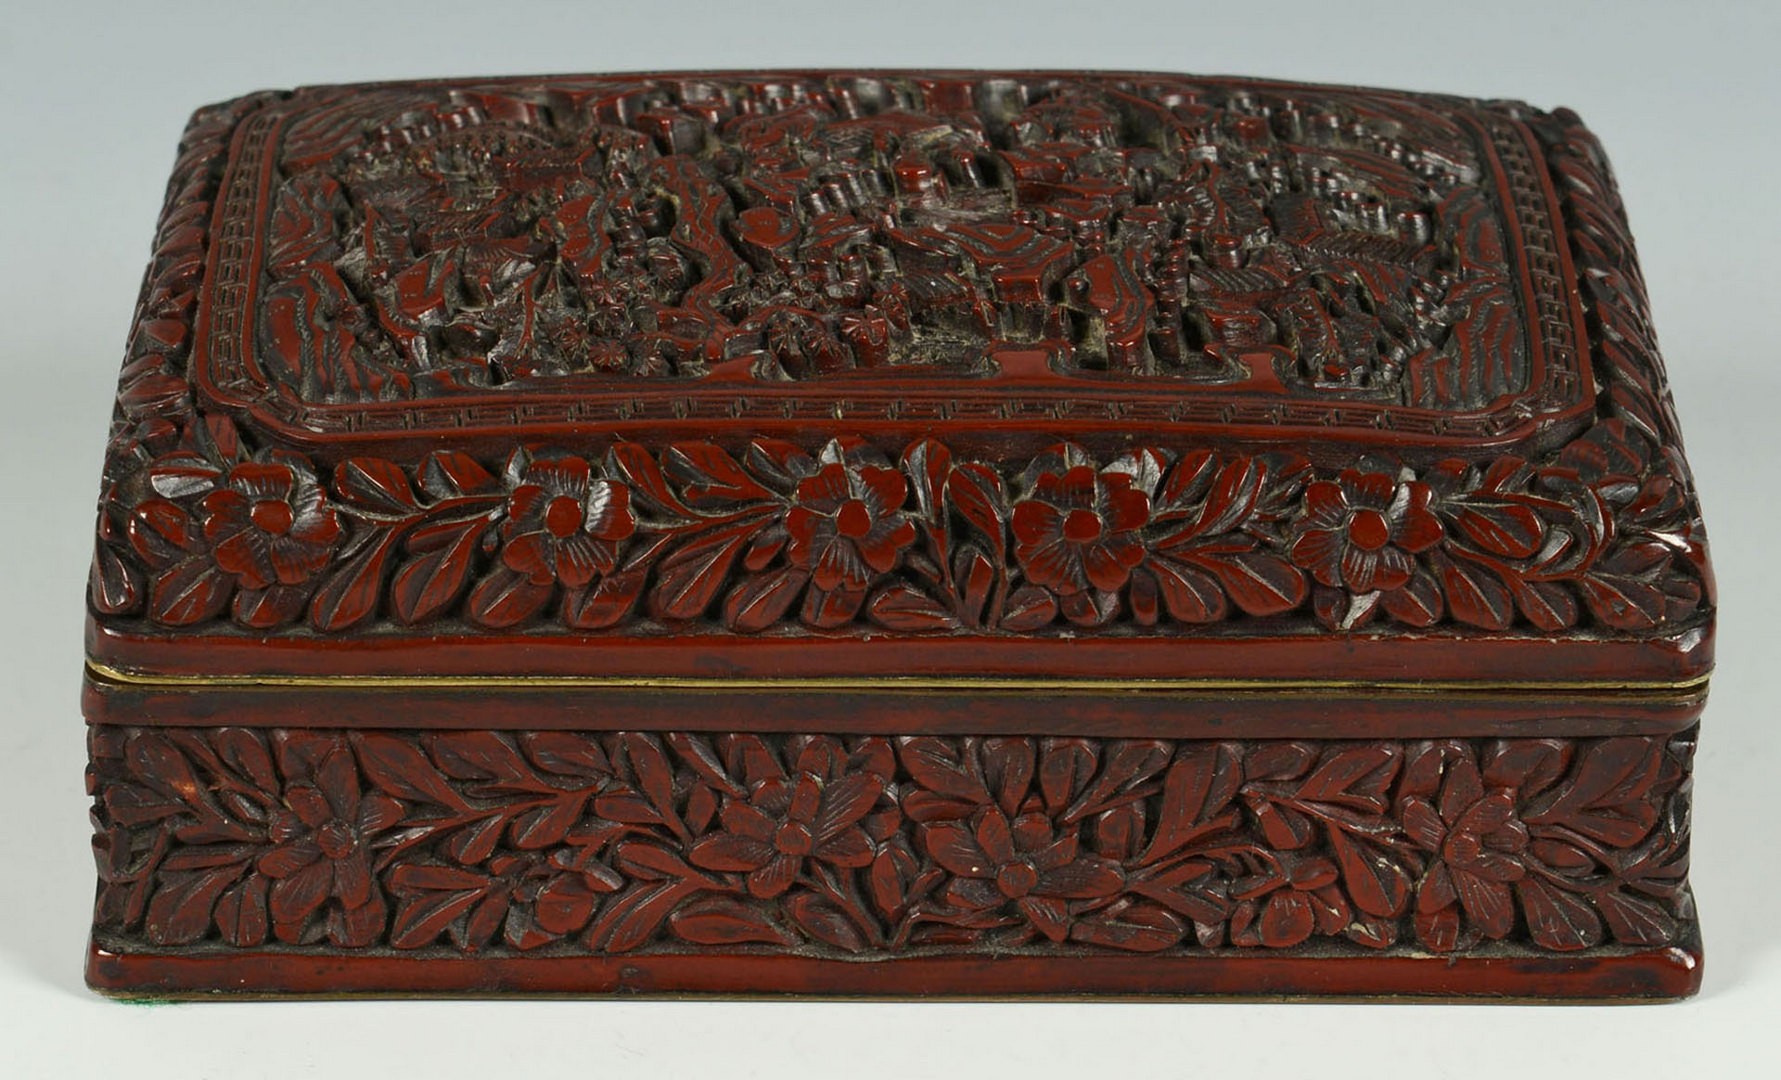 Lot 4: 19th century Carved Chinese Cinnabar Box